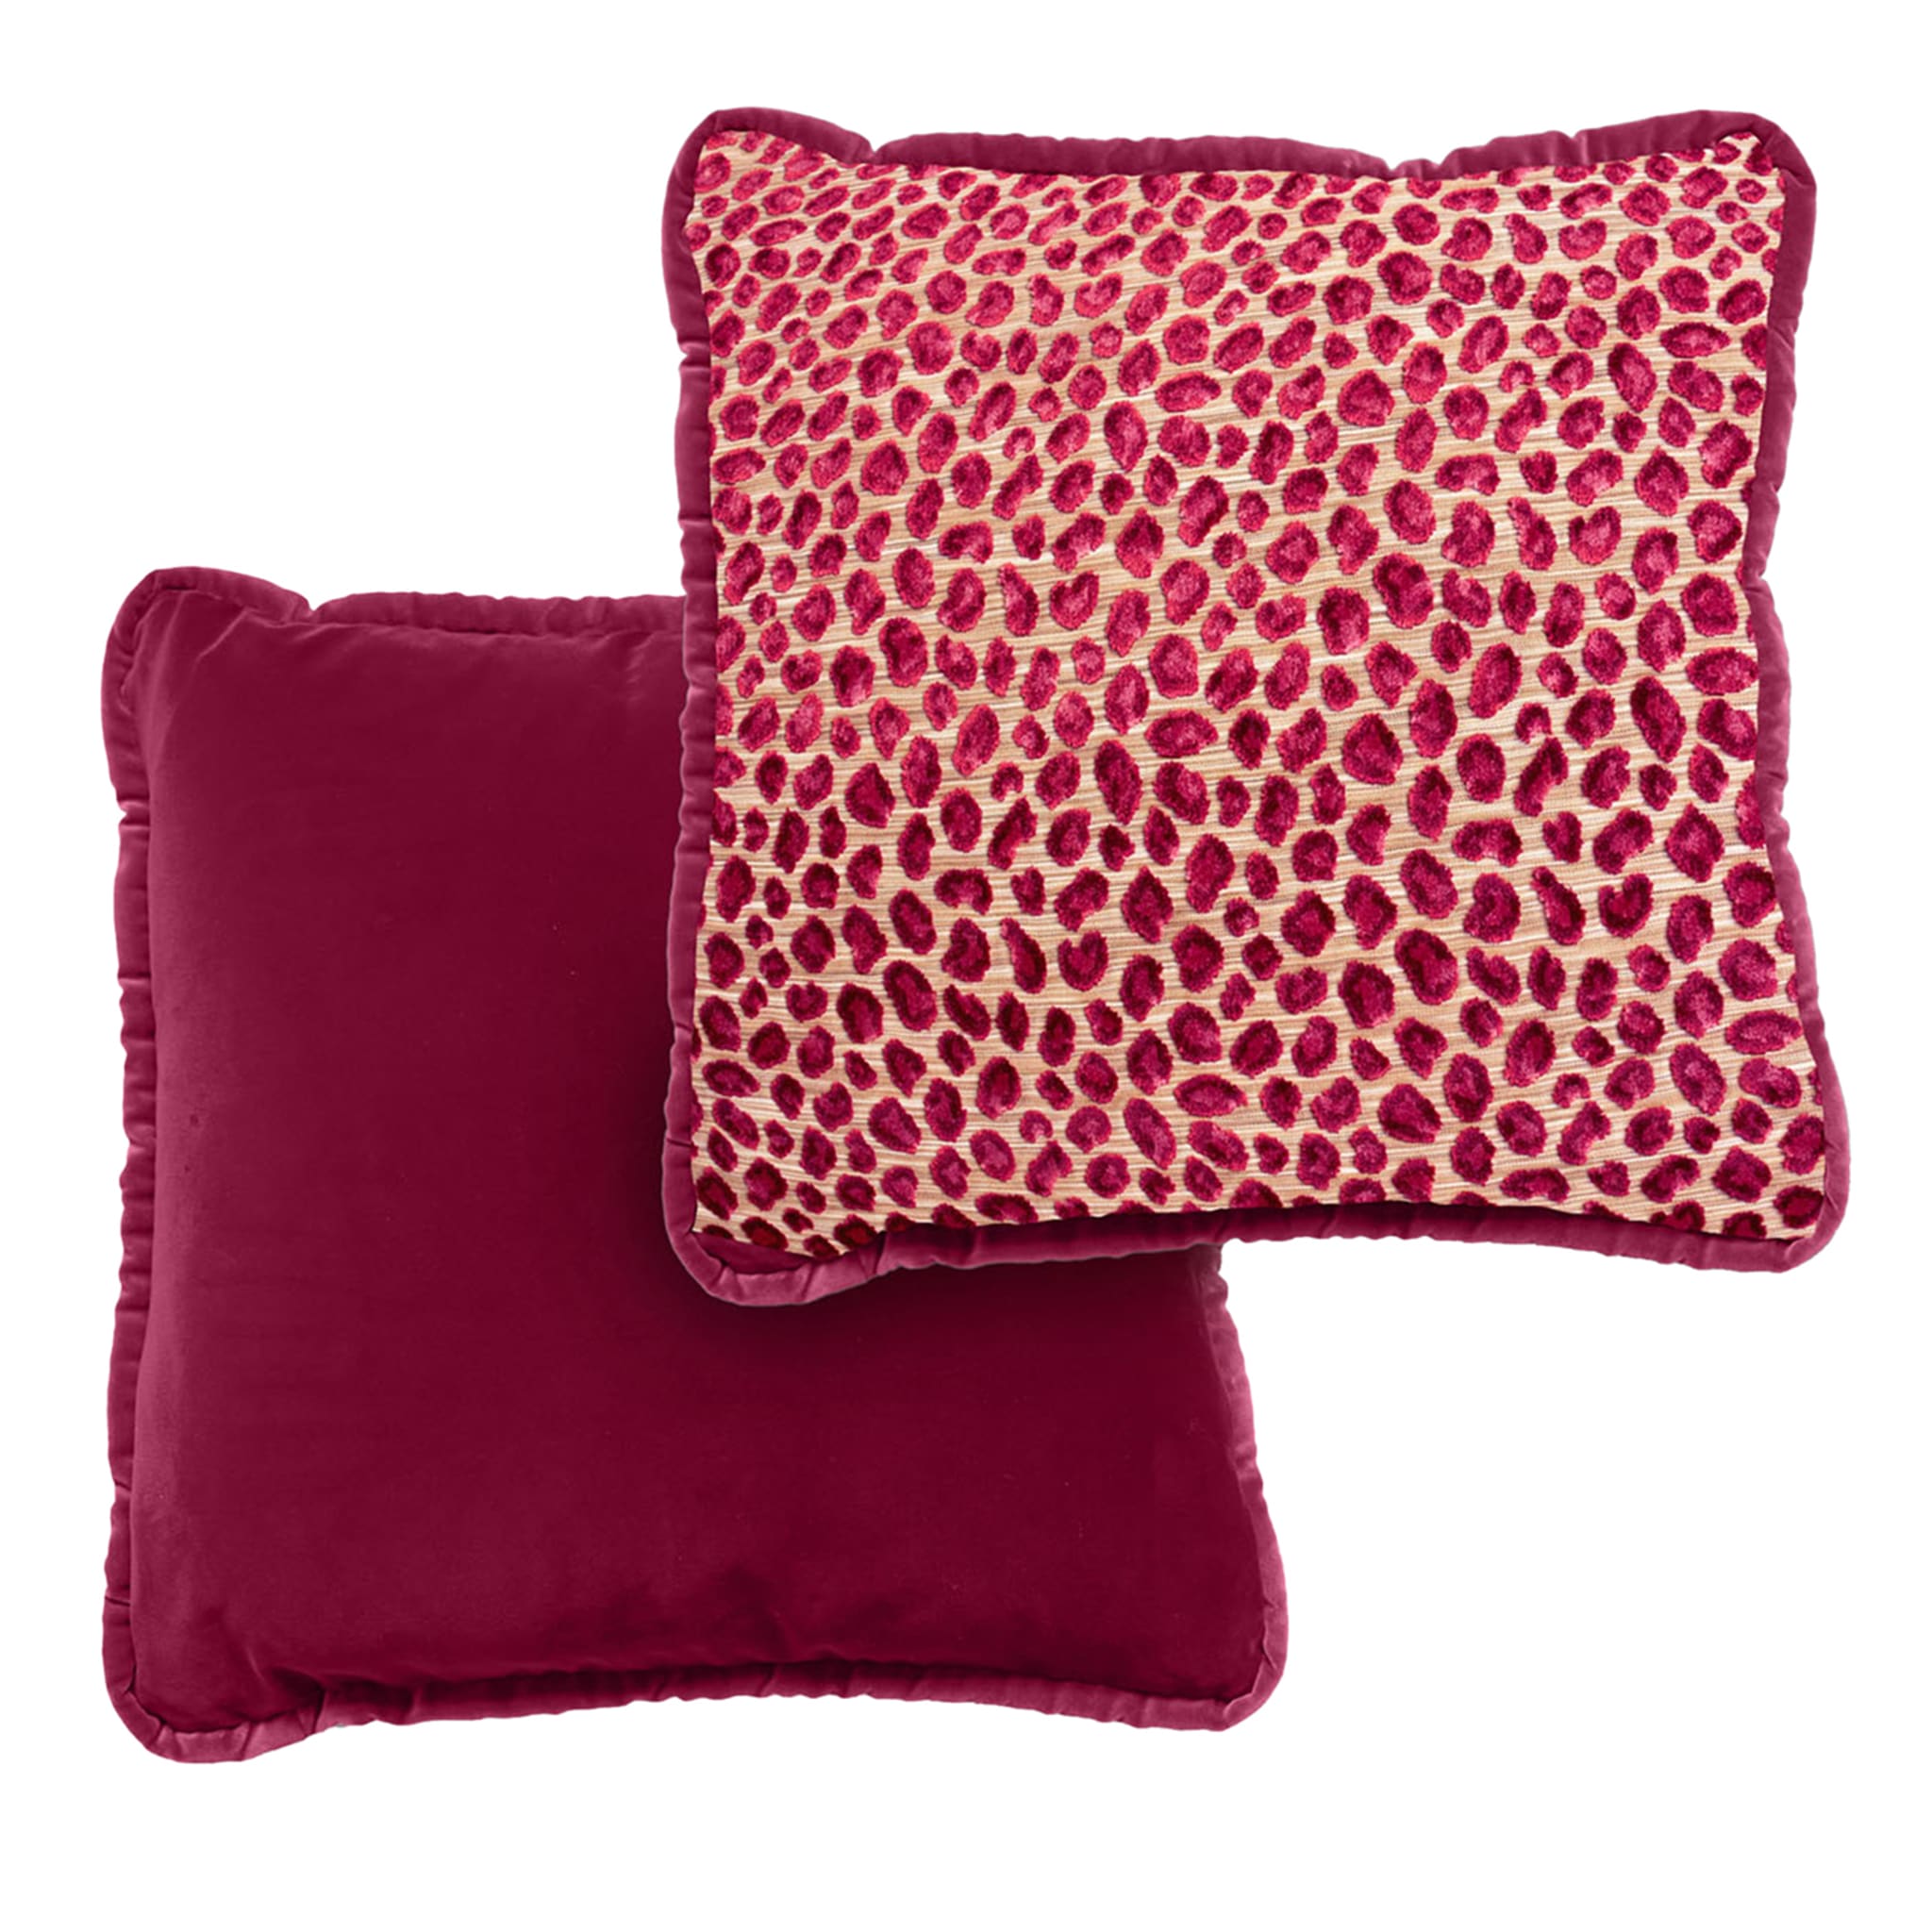 Glam Leopard and Red Couture Velvet Reversible Cushion - Alternative view 1